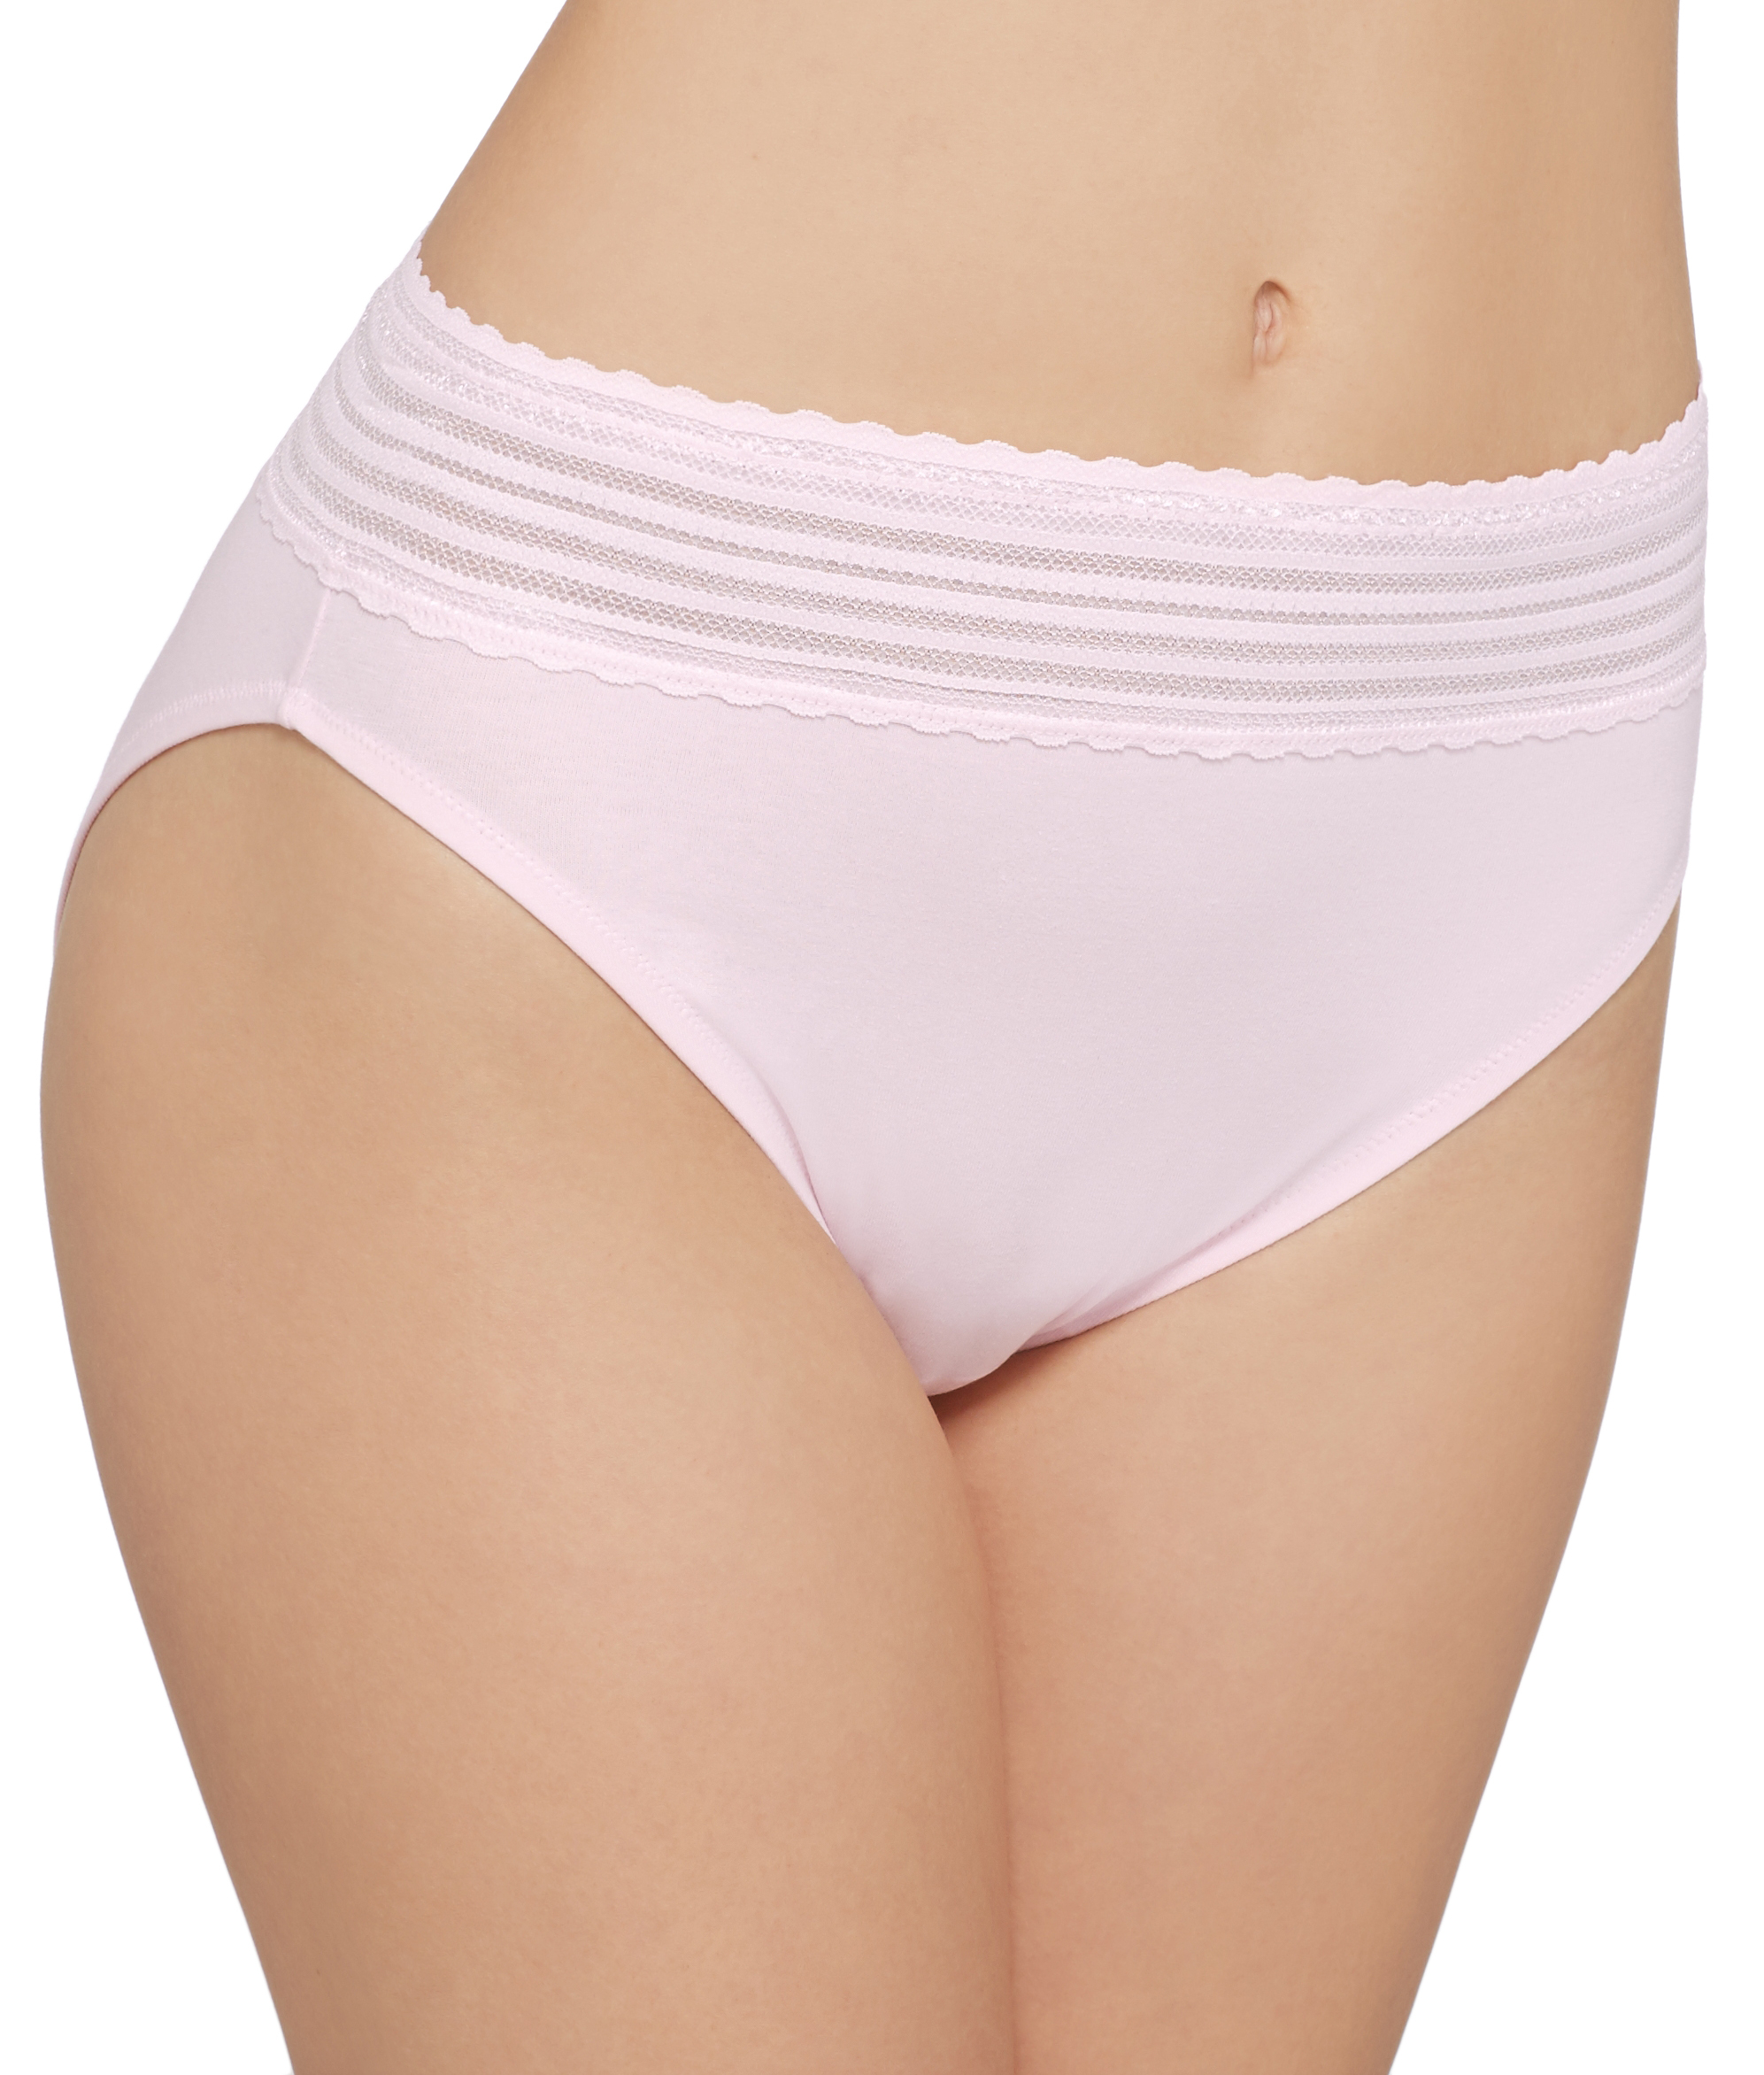 Warner's Womens No Pinching. No Problems. Cotton Hi-Cut Brief Style-RT2091P - image 1 of 2